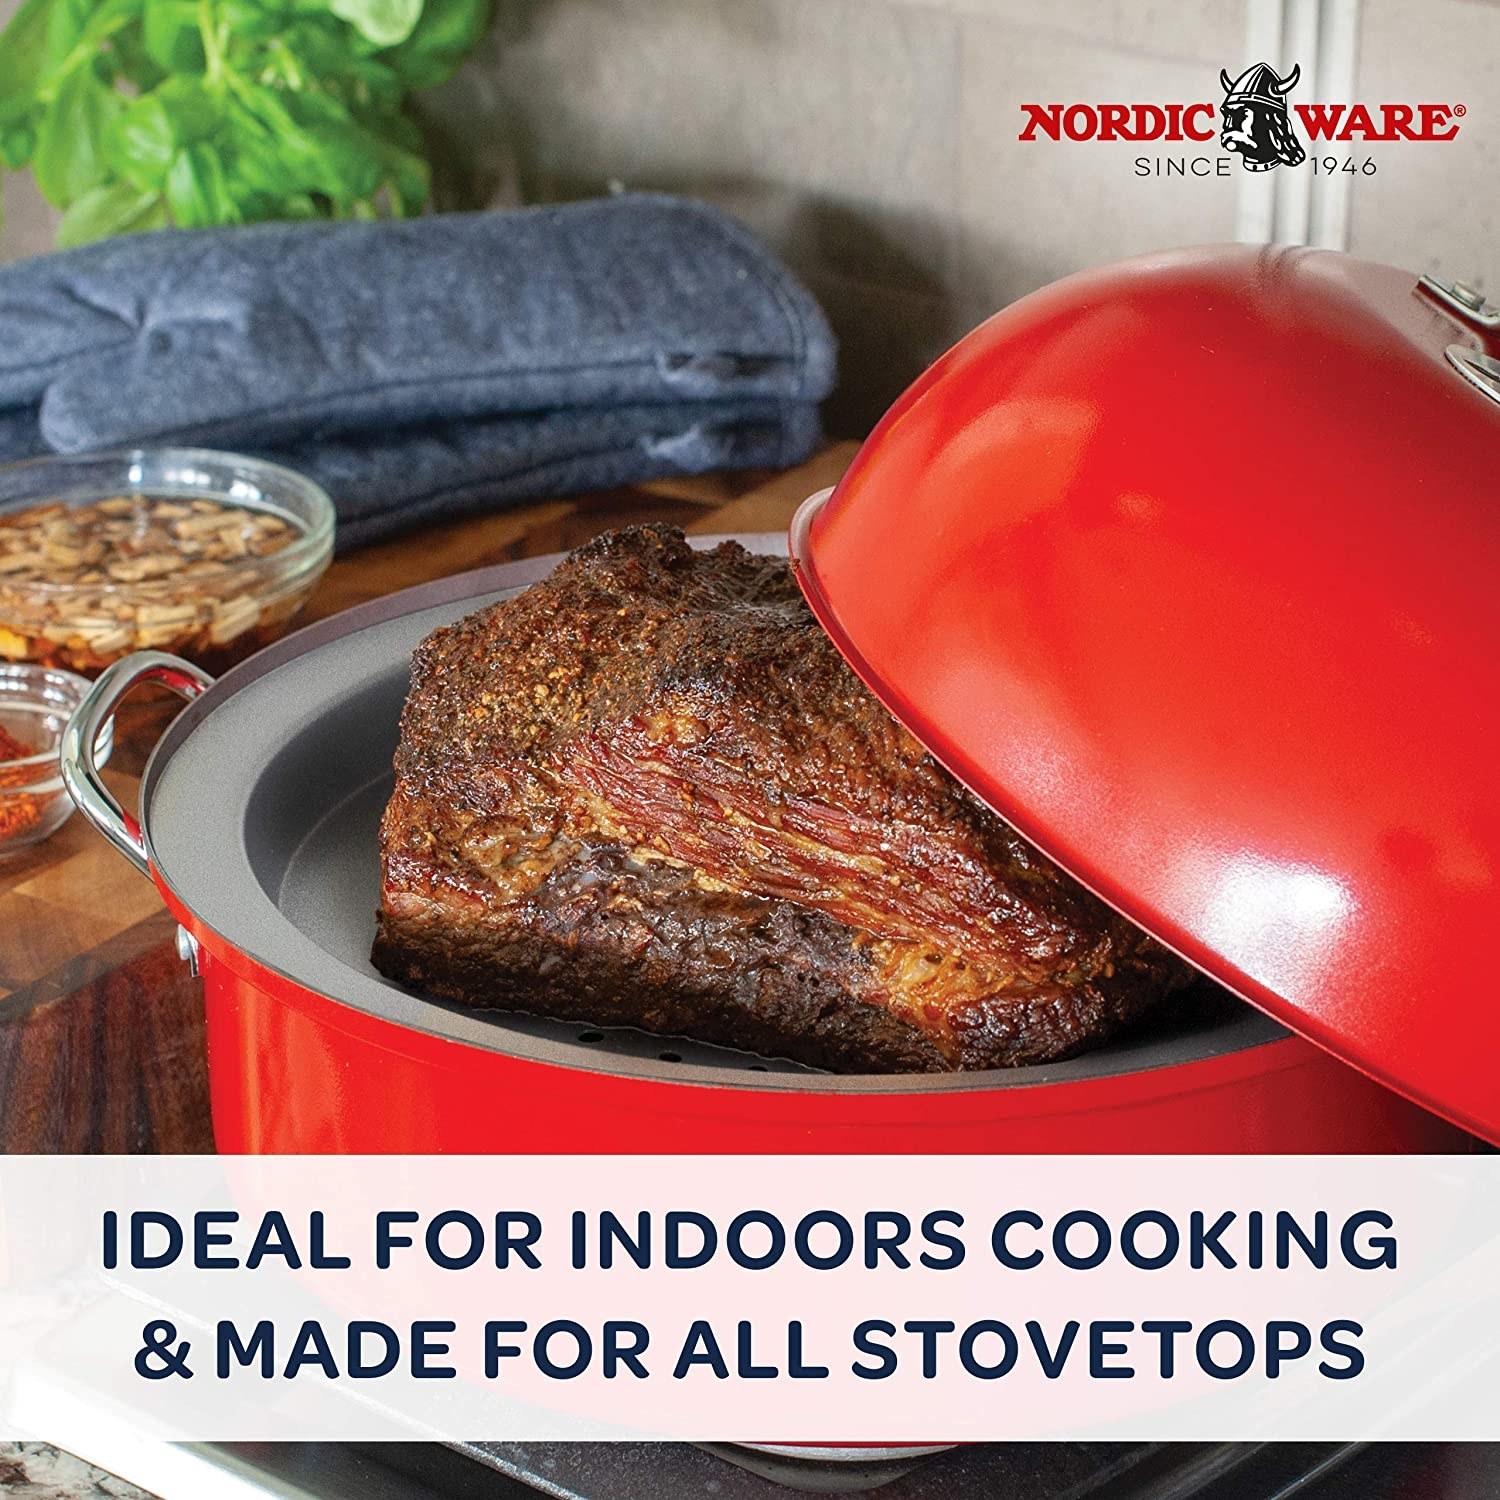 The red cooker with meat inside and text &quot;idea for indoors cooking and made for all stovetops&quot;